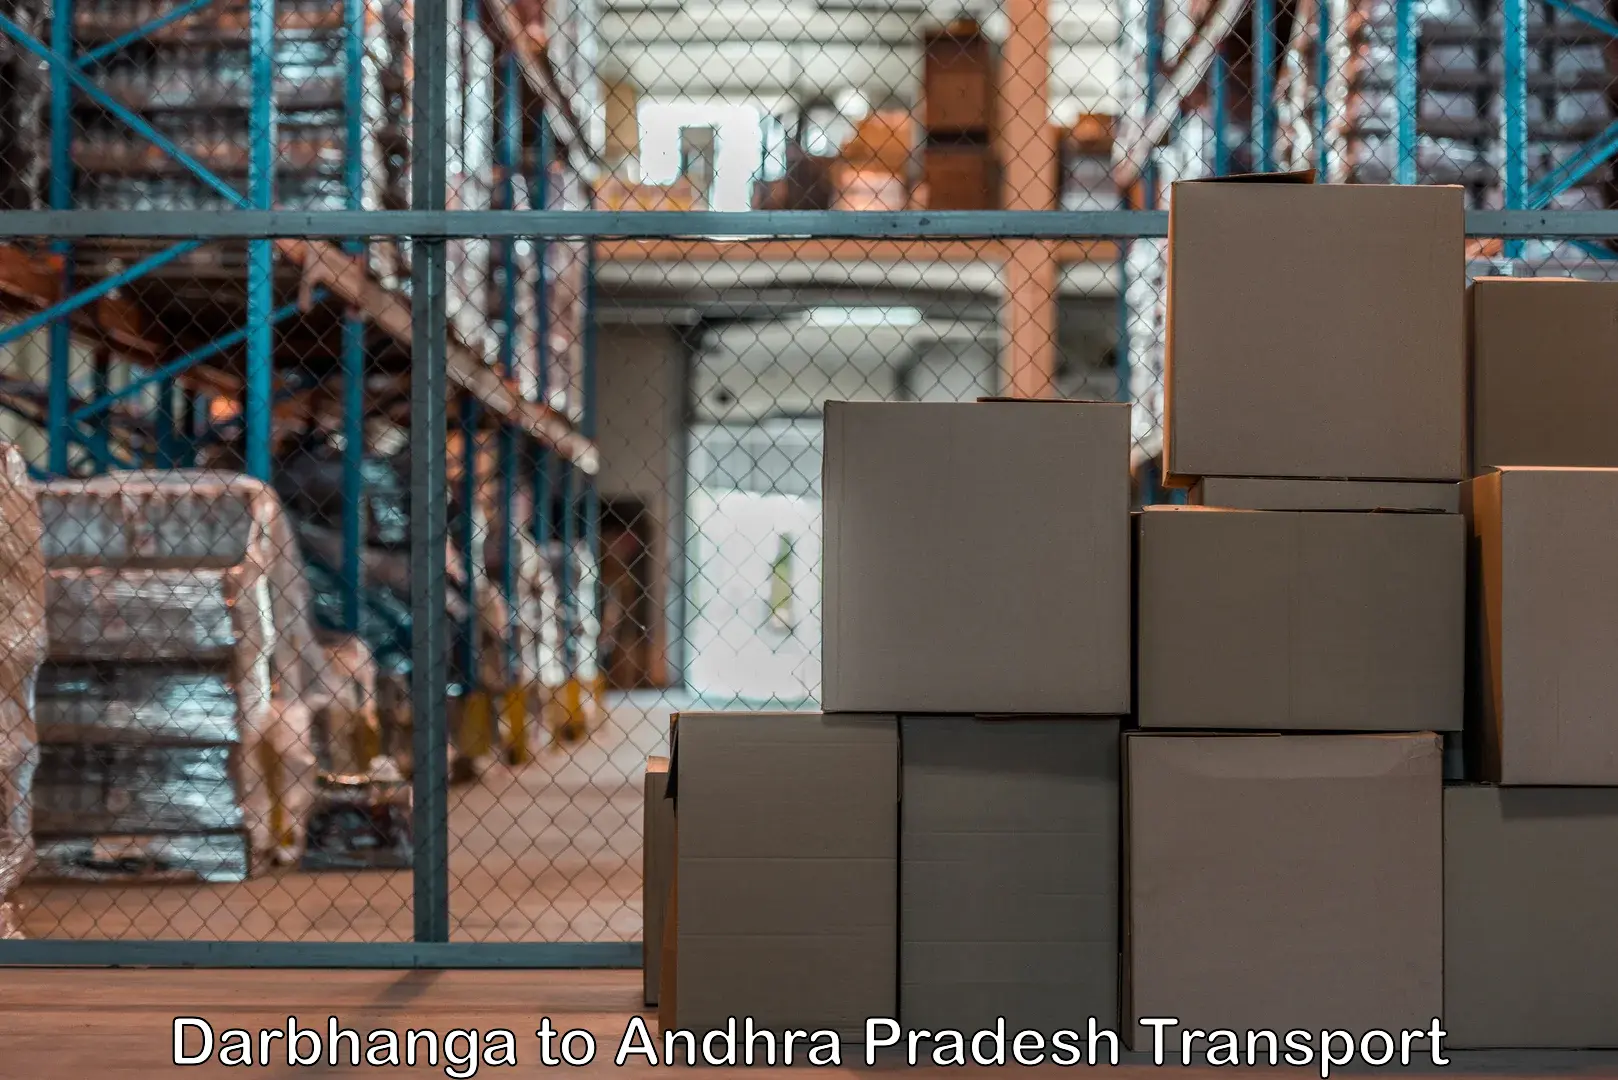 Road transport online services in Darbhanga to Chodavaram